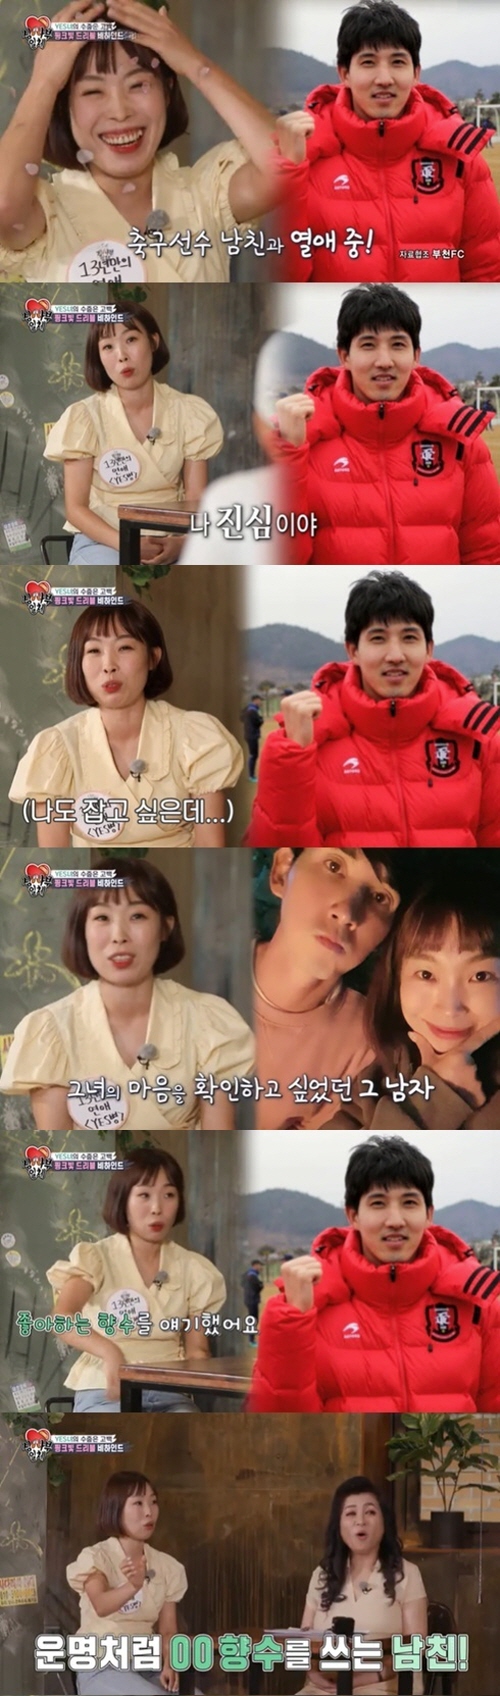 On the 17th, SBS entertainment All The Butlers held Oh Eun Youngs O Doctorates Secret Hauso.Oh Eun Young, who emphasized the danger of constipation in his mind, rolled his arms to solve the cool troubles.Counselors who needed counseling appeared, and All The Butlers members also talked with counselors.The first counselor came out with the worry of love, yes disease in 13 years. The counselor introduced herself as a single woman living in Seoul.The counselor said, I am not good at rejecting because I am sick of the disease. If someone asks me, I will do it.It was comedian Oh Nami.Oh Nami said: The new manager bought a hot coffee in the winter and left it in the car, but Im dead, I cant talk about it. Then I went to the cafe and said, What are you eating?I said ice americano. I said I liked ice americano. I was surprised why I hadnt told you. About a month.I appreciate the heart, so I (I didnt say it), he said.Lee Seung-gi said: Yes, I think all of them are the same. I do not ask for help. Thats the most stressful thing.I do not hear that you can not set up your own. Oh Nami surprised the crowd by saying, The most serious thing is money, I can not make a sound when I lend it, and my close friend borrowed up to 30 million won because I needed money.Someone told me that. I thought there was a good complex. You have to be good to everyone.I have to say good things to everyone and not bad things to everyone. I heard that I should throw away this.I also confessed about love: Oh Nami said: I started dating in the last 13 years, Boy friend should be the closest and secretless, frankly.I can not even say that when I have a hard or bad thing, I will not be able to say that Boy friend will be hard. Boy friend was upset with that. Oh Eun Young asked, Do you fart with Boy friend? Oh Nami replied, I didnt open it, said Saint-Earl, who had shown it.When asked if he had received a lot of praise for being good since he was a child, he replied, I heard the best.Oh Nami, who is in love with Park Min, a soccer player, said of his first meeting, I have a brother playing soccer.My brother (now Boy friend) said, What is your ideal type of entertainer? But I dont believe it, but he told me about me.I said that Oh Nami is very attractive. I know Nami. I was introduced to this. I was so nervous. Oh Nami said, I was driving in the car and suddenly the Friend said, Can I hold your hand? I said, I have a cold hand.I wanted to check my mind and said that I talked about it. I tried to turn the neighborhood around, but I turned five laps. I liked perfume because I liked what I liked, and I said so. Boy friend was already wearing it.I got into the Friend car and it smelled like that. Ive put it on my seat belt to smell more.It gives a lot of consideration, he boasted.But Boy friends like to open and share hard work, bad work, and troubles, but I do not like it.I want to share it, but I was upset because I did not say that. I thought I should give him good energy. Oh Eun Young asked, Have you ever swarmed and whined at your parents? Oh Nami said, No, Grandma, Grandpa raised me so much that I didnt do it.I think its like a fool, Ive heard a lot about being stupid, he said.Oh Eun Young said: Mr Nami wants to be a good person for others, so hes just trying to look good.If you do not listen to others requests, you can judge that it is good for the relationship that you do not give this when you think about it. When you say no money, Why do not you do it? This sound is painful.I think I am not a good person, so I think I will think that I am stupid. Mr. Nami is a good person as it is, and he always seems to like me just to show me this way without being Nice and fart.In other words, I am a good person in any situation. It is related to self-esteem.If I do not pay, I will have confidence in him and me. I think I should be proud. He also advised on his relationship with Boy Friend: Its called normal regression, by regressing in a very close relationship, its about getting comfort and comfort in the mind.This is how you relieve your stress. You can fart during normal regression. You have to. Basically, trust must remain unchanged.I have to be a person who respects and loves me as a human being without decorating. Photo: SBS Broadcasting Screen